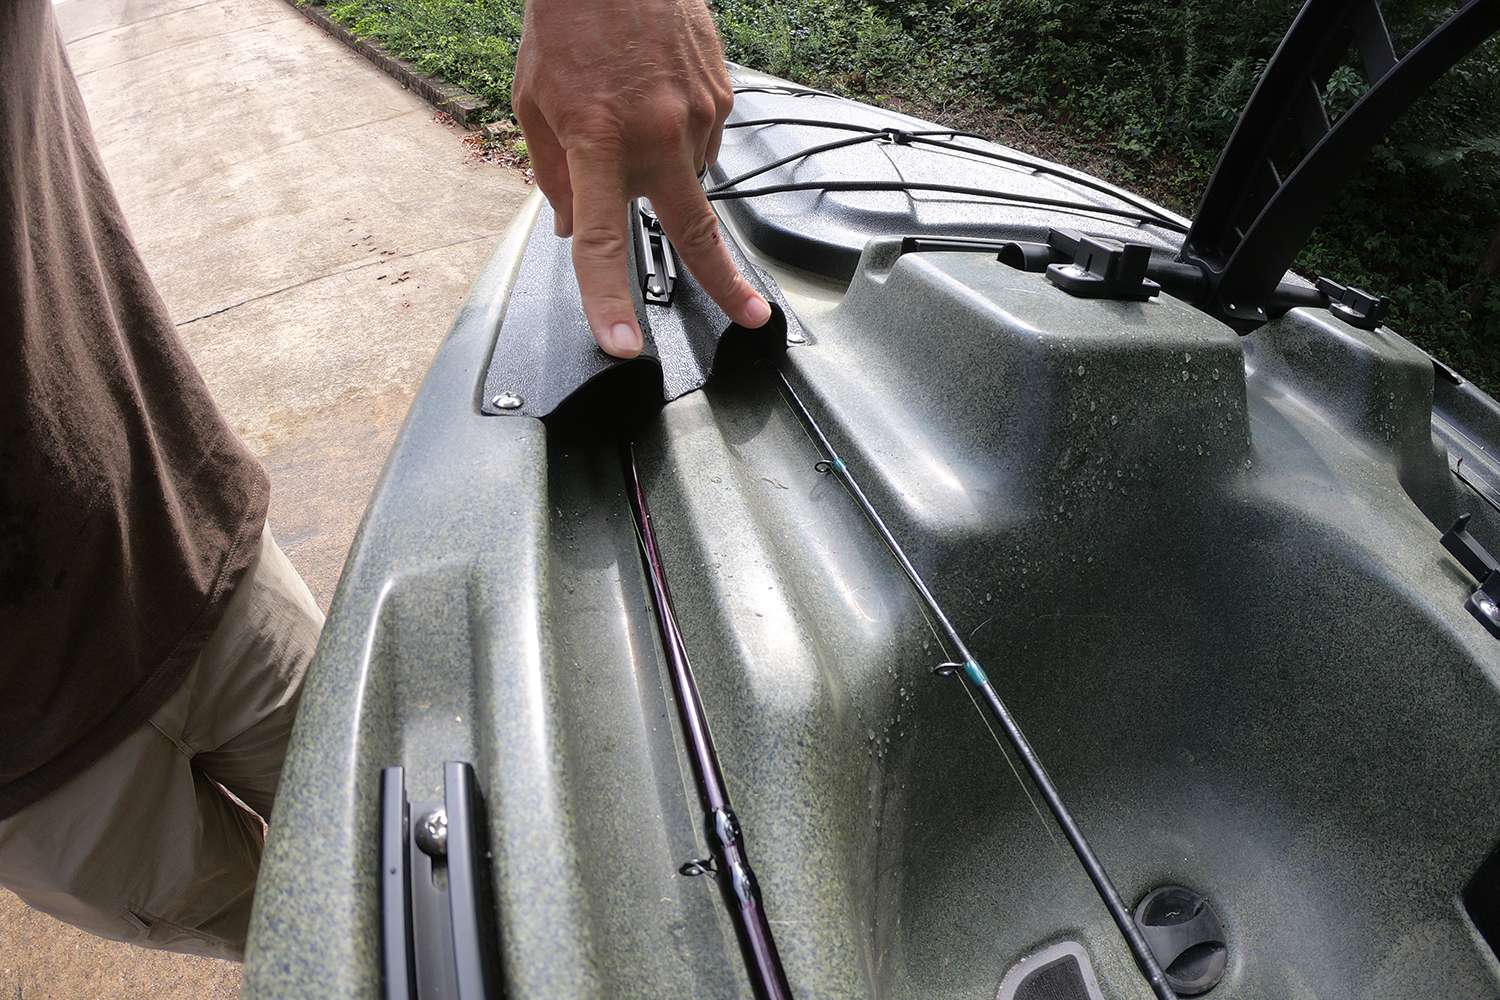 On the top along the sides of the front hatch are four rod tubes to protect your rod tips during transportation. 